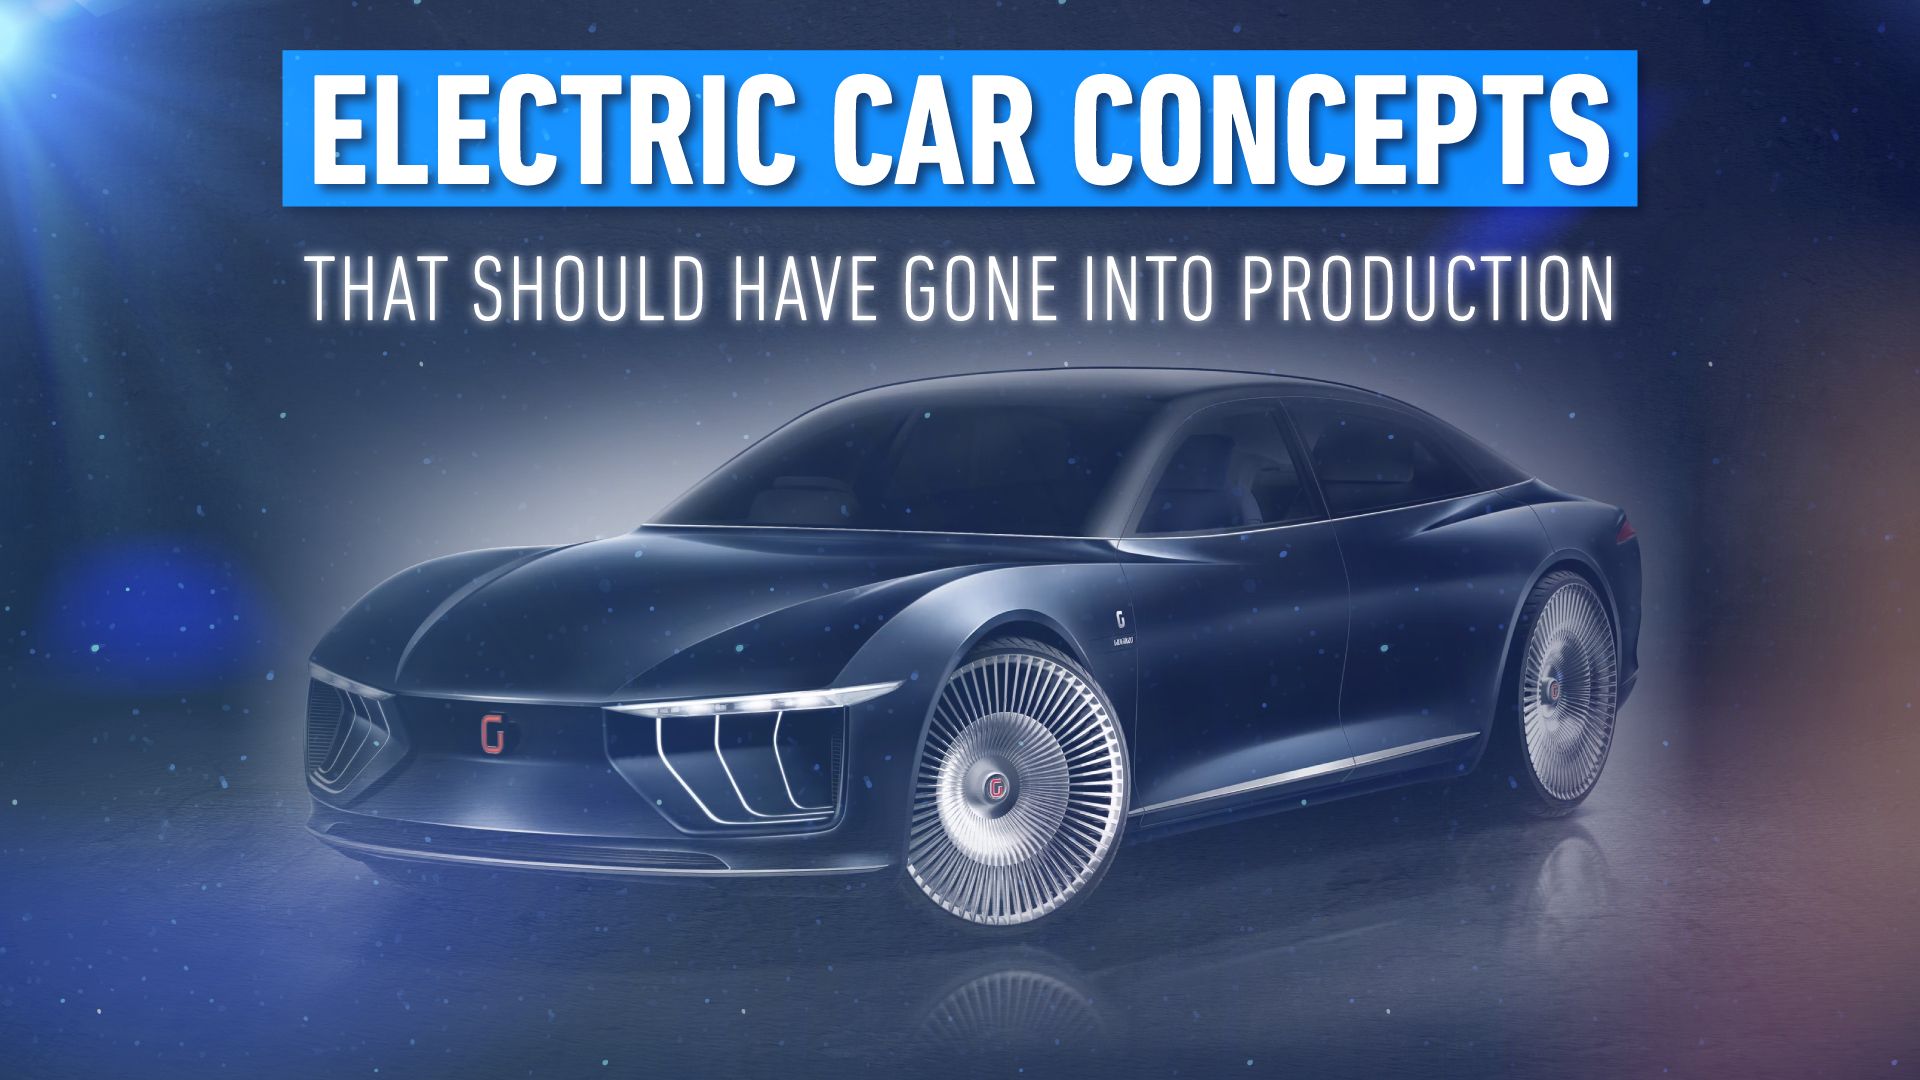 10 Electric Car Concepts That Should Have Gone Into Production